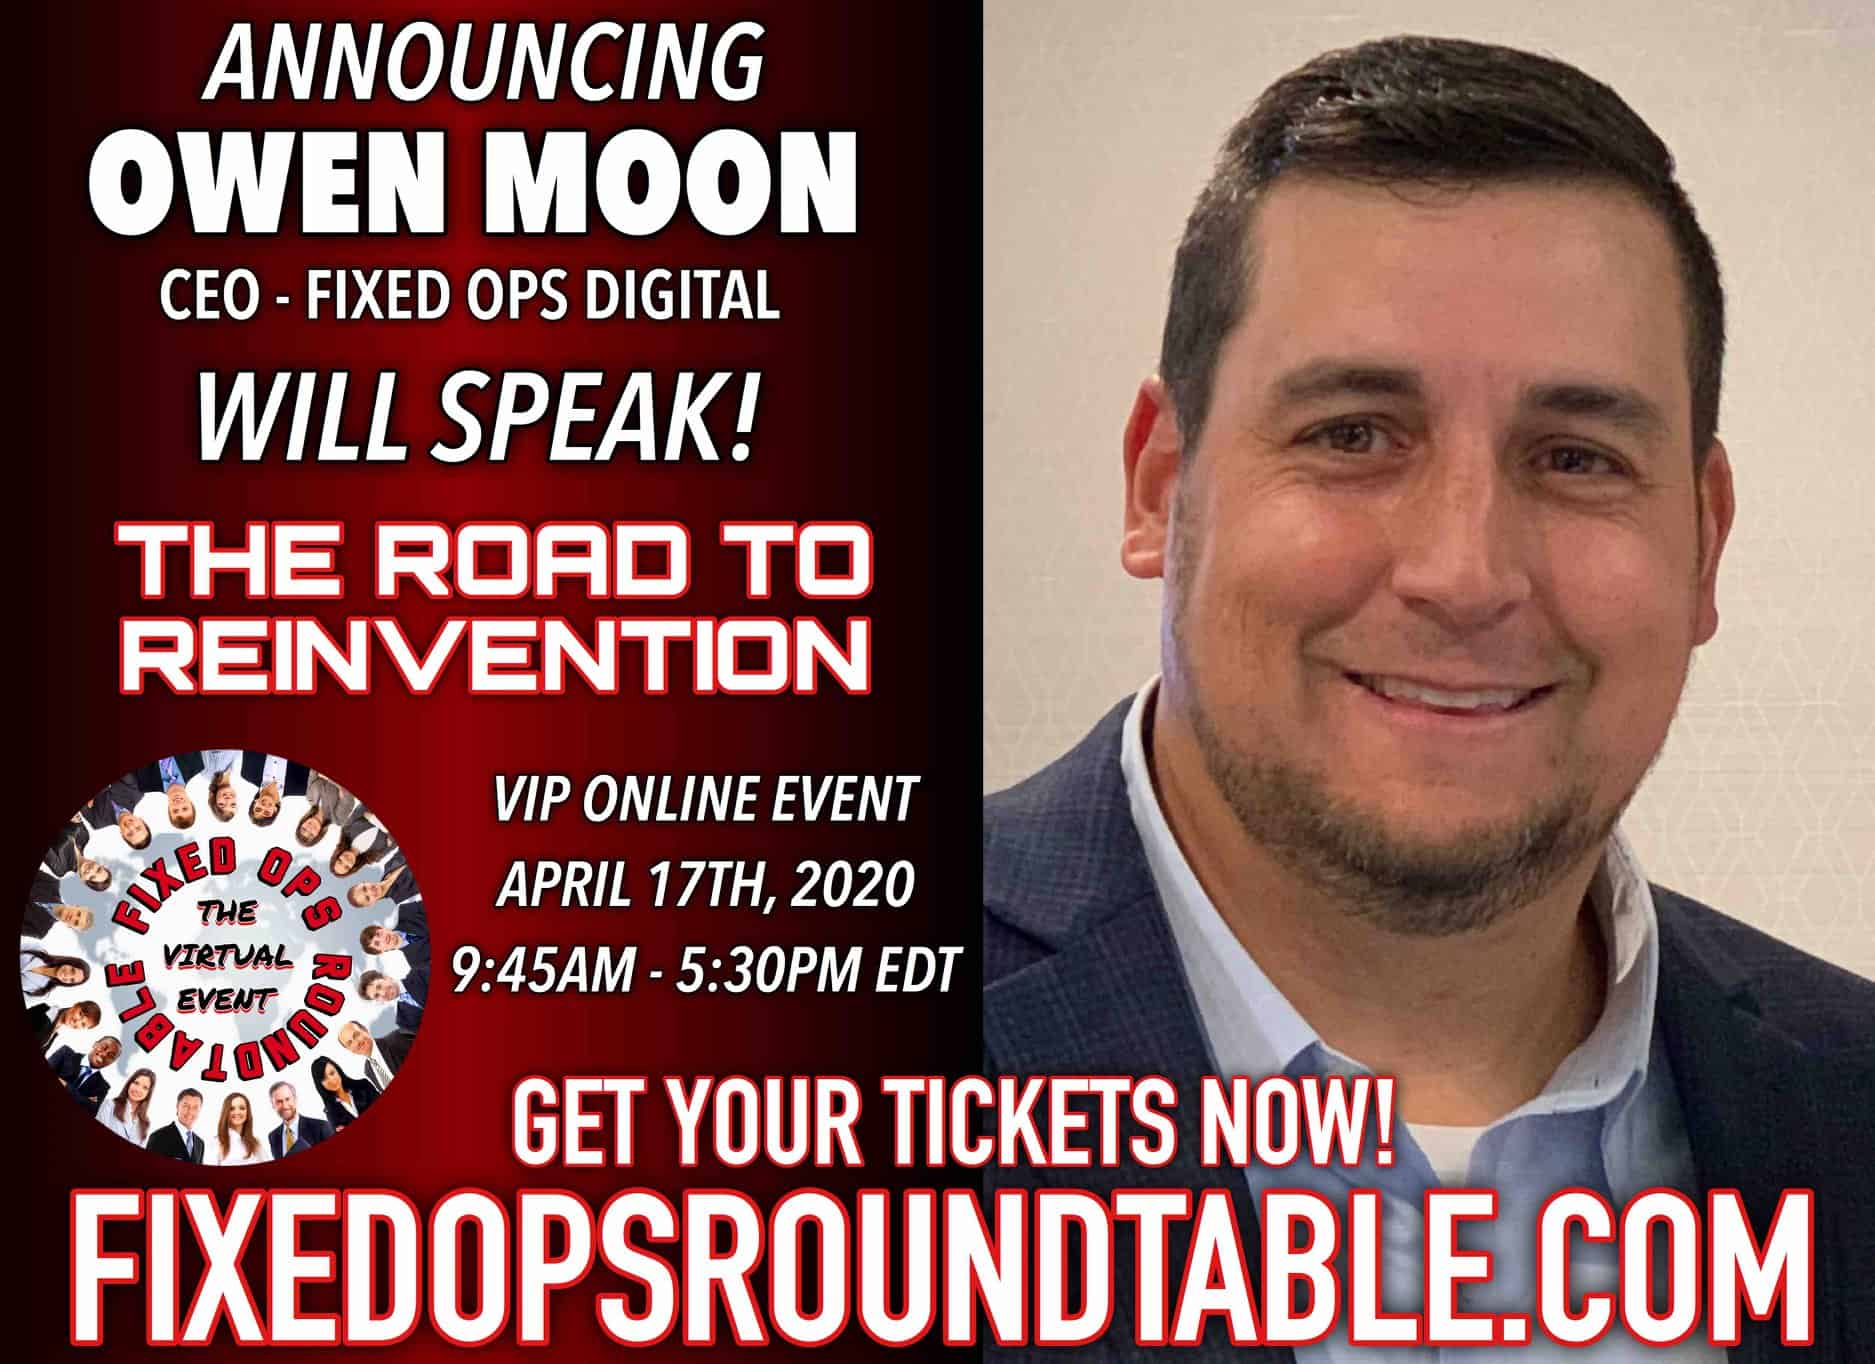 Fixed Ops Roundtable Virtual Event